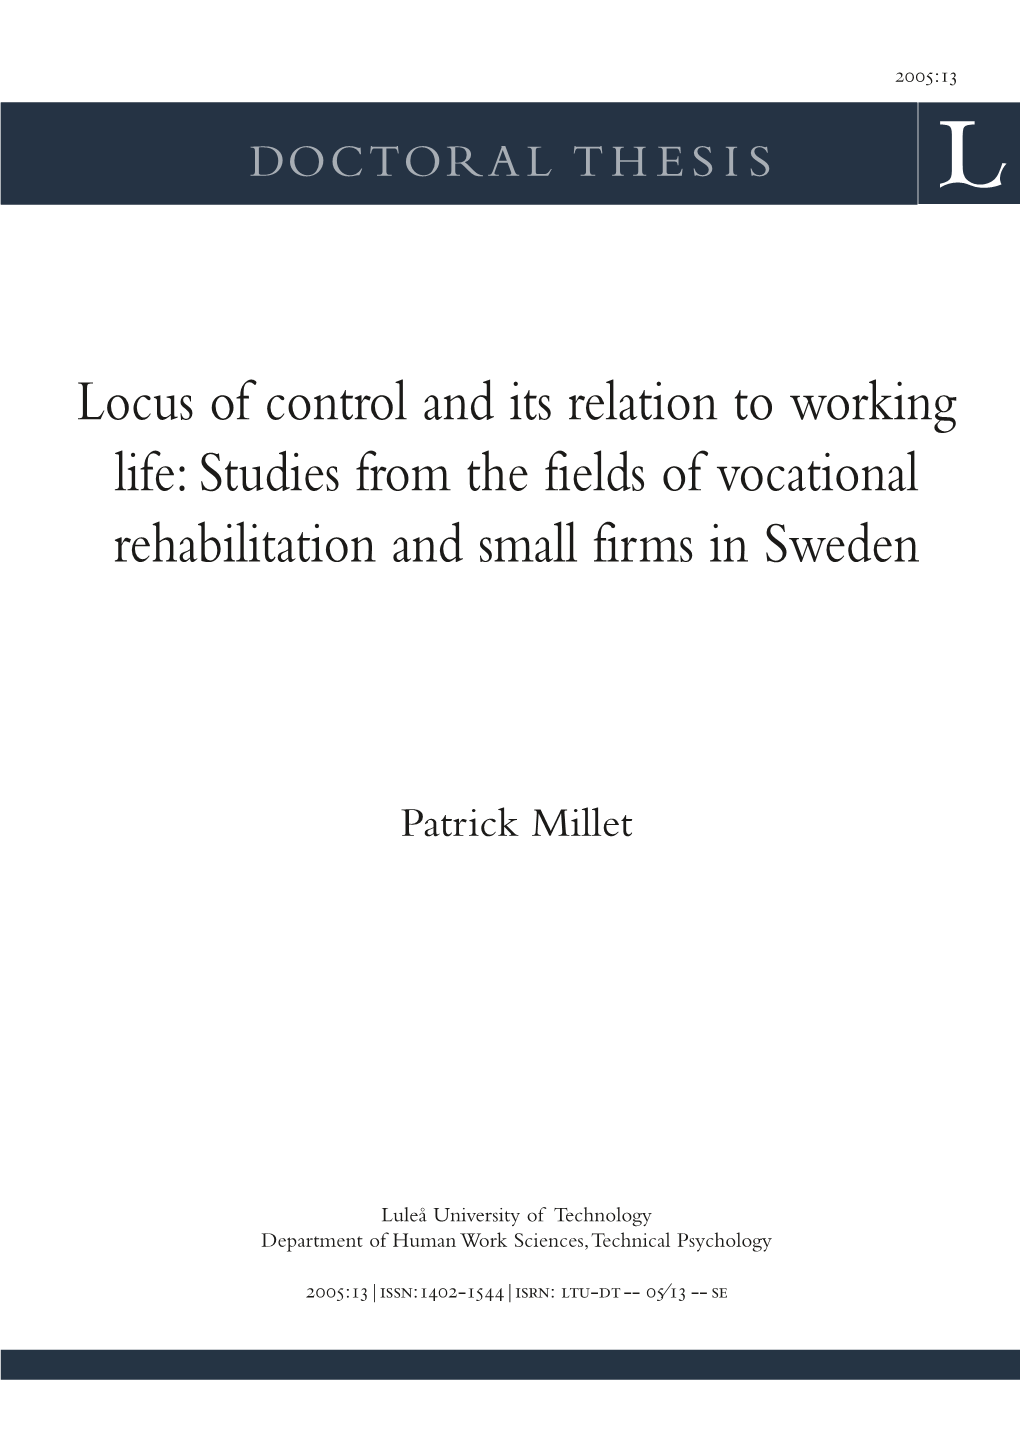 Locus of Control and Its Relation to Working Life: Studies from the Fields of Vocational Rehabilitation and Small Firms in Sweden